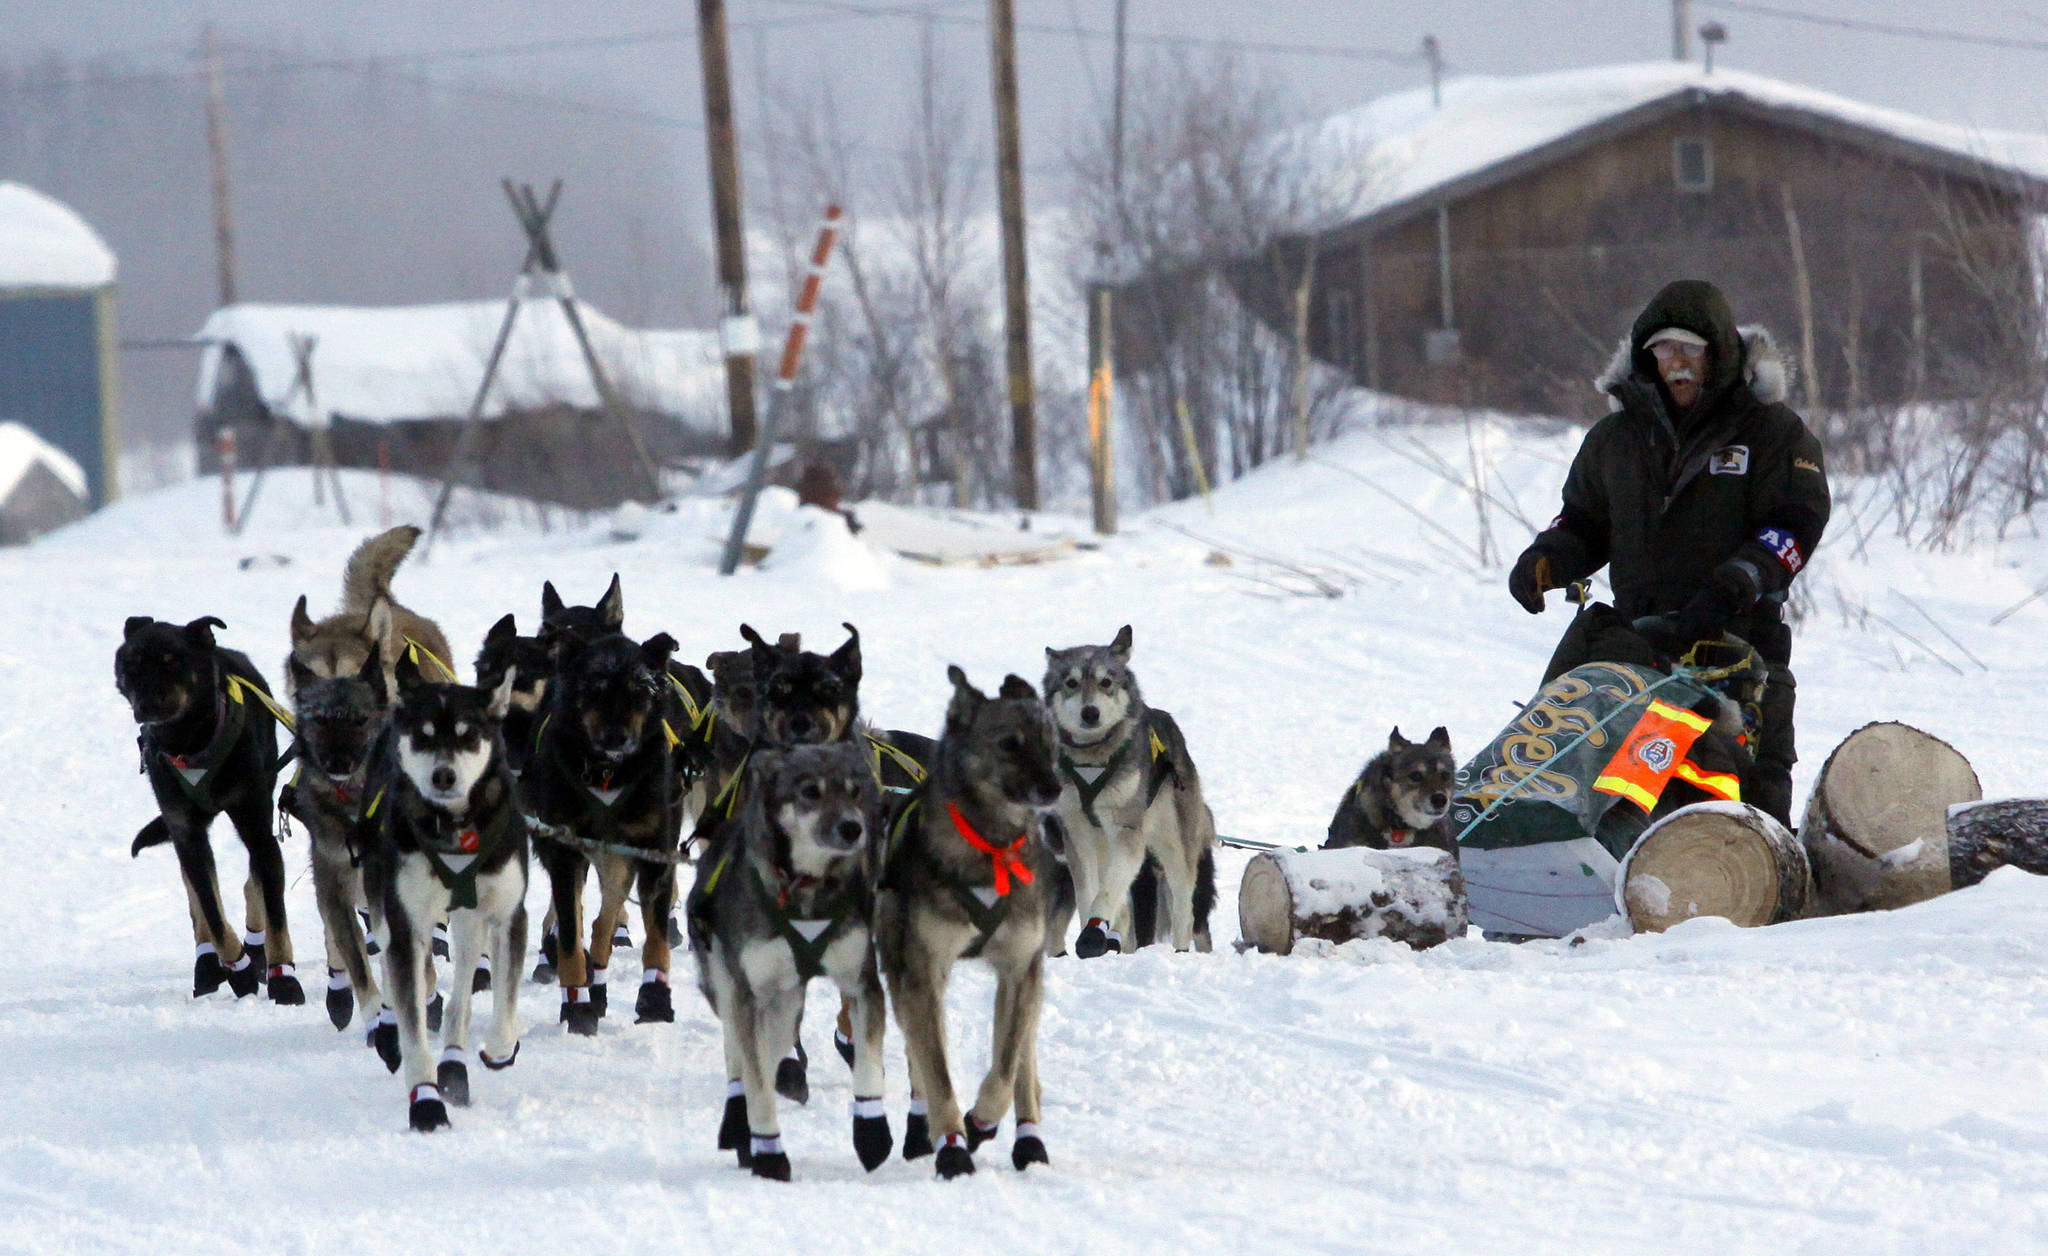 In this March 15, 2009, Jeff King leaves the Kaltag, Alaska, checkpoint on the Iditarod Trail Sled Dog Race. Emergency surgery has sidelined the four-time race winner days before he was set to compete in his 30th race. King withdrew Tuesday, March 3, 2020, over concerns for his health, a spokeswoman for the Iditarod told The Associated Press. The race will start Sunday north of Anchorage. (AP Photo/Al Grillo,File)